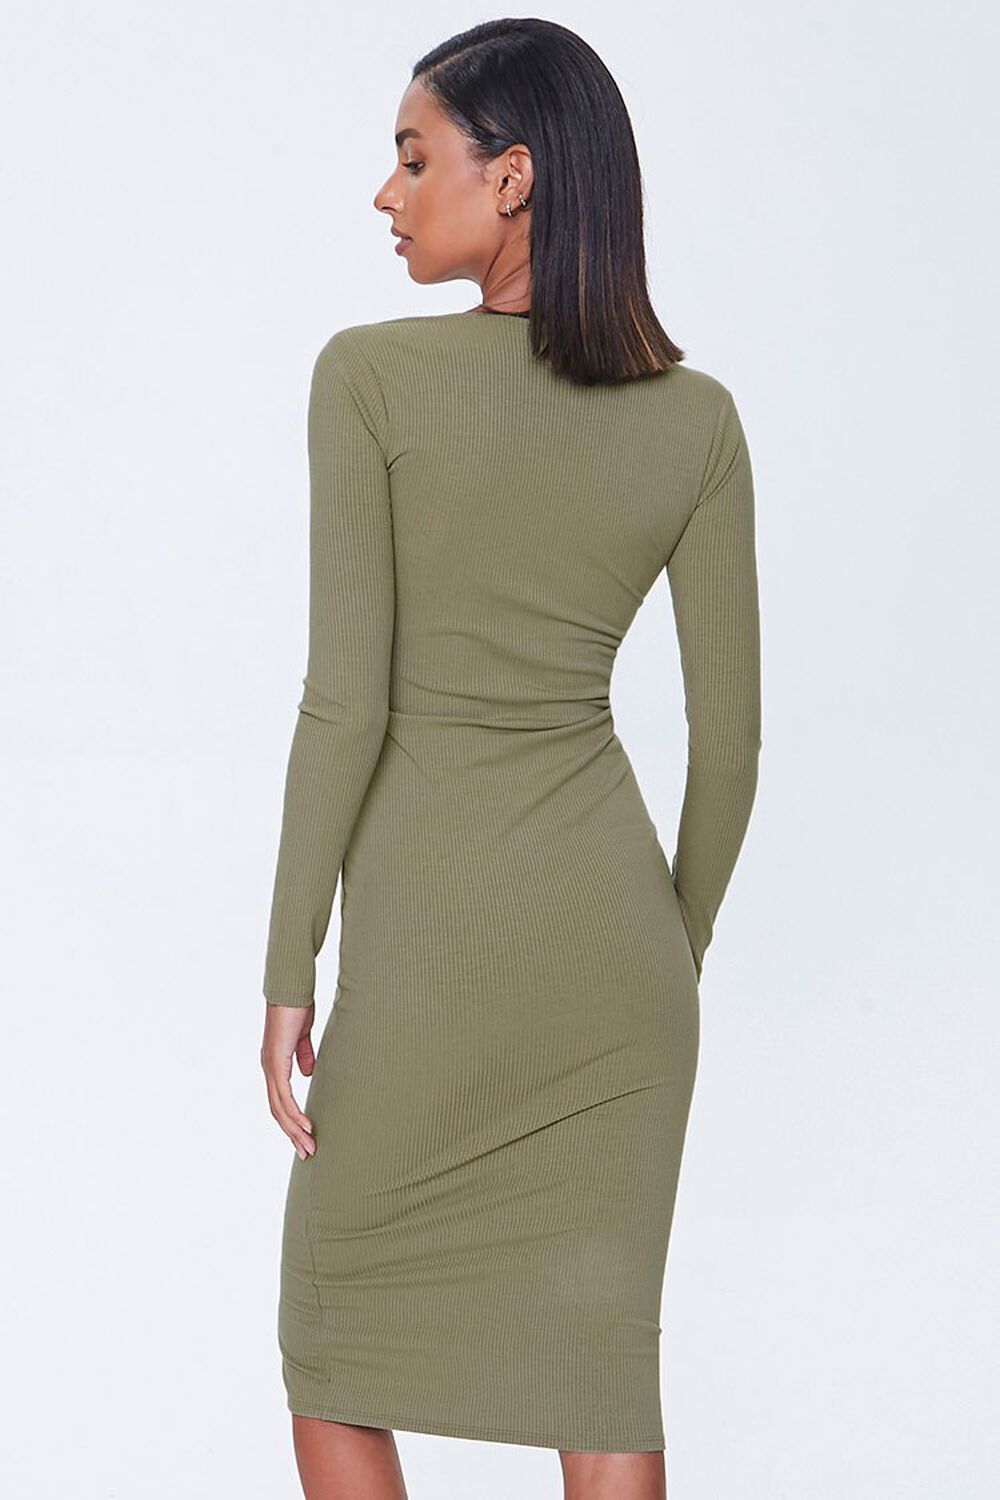 OLIVE Button-Front Midi Dress, image 3